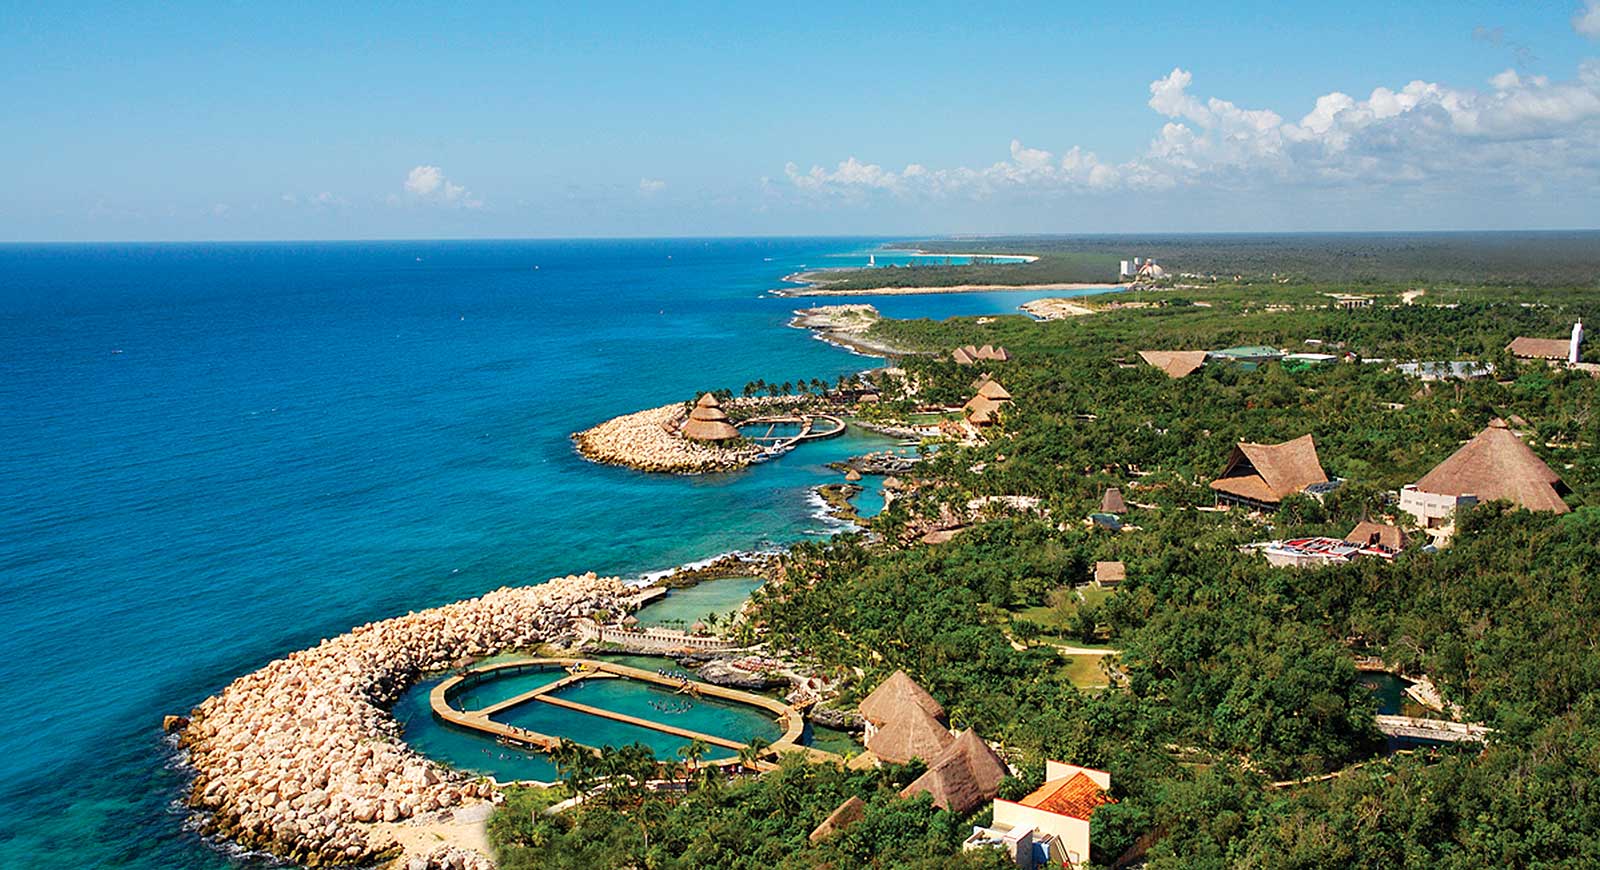 Cancun Airport to Barcelo Occidental at Xcaret Destination